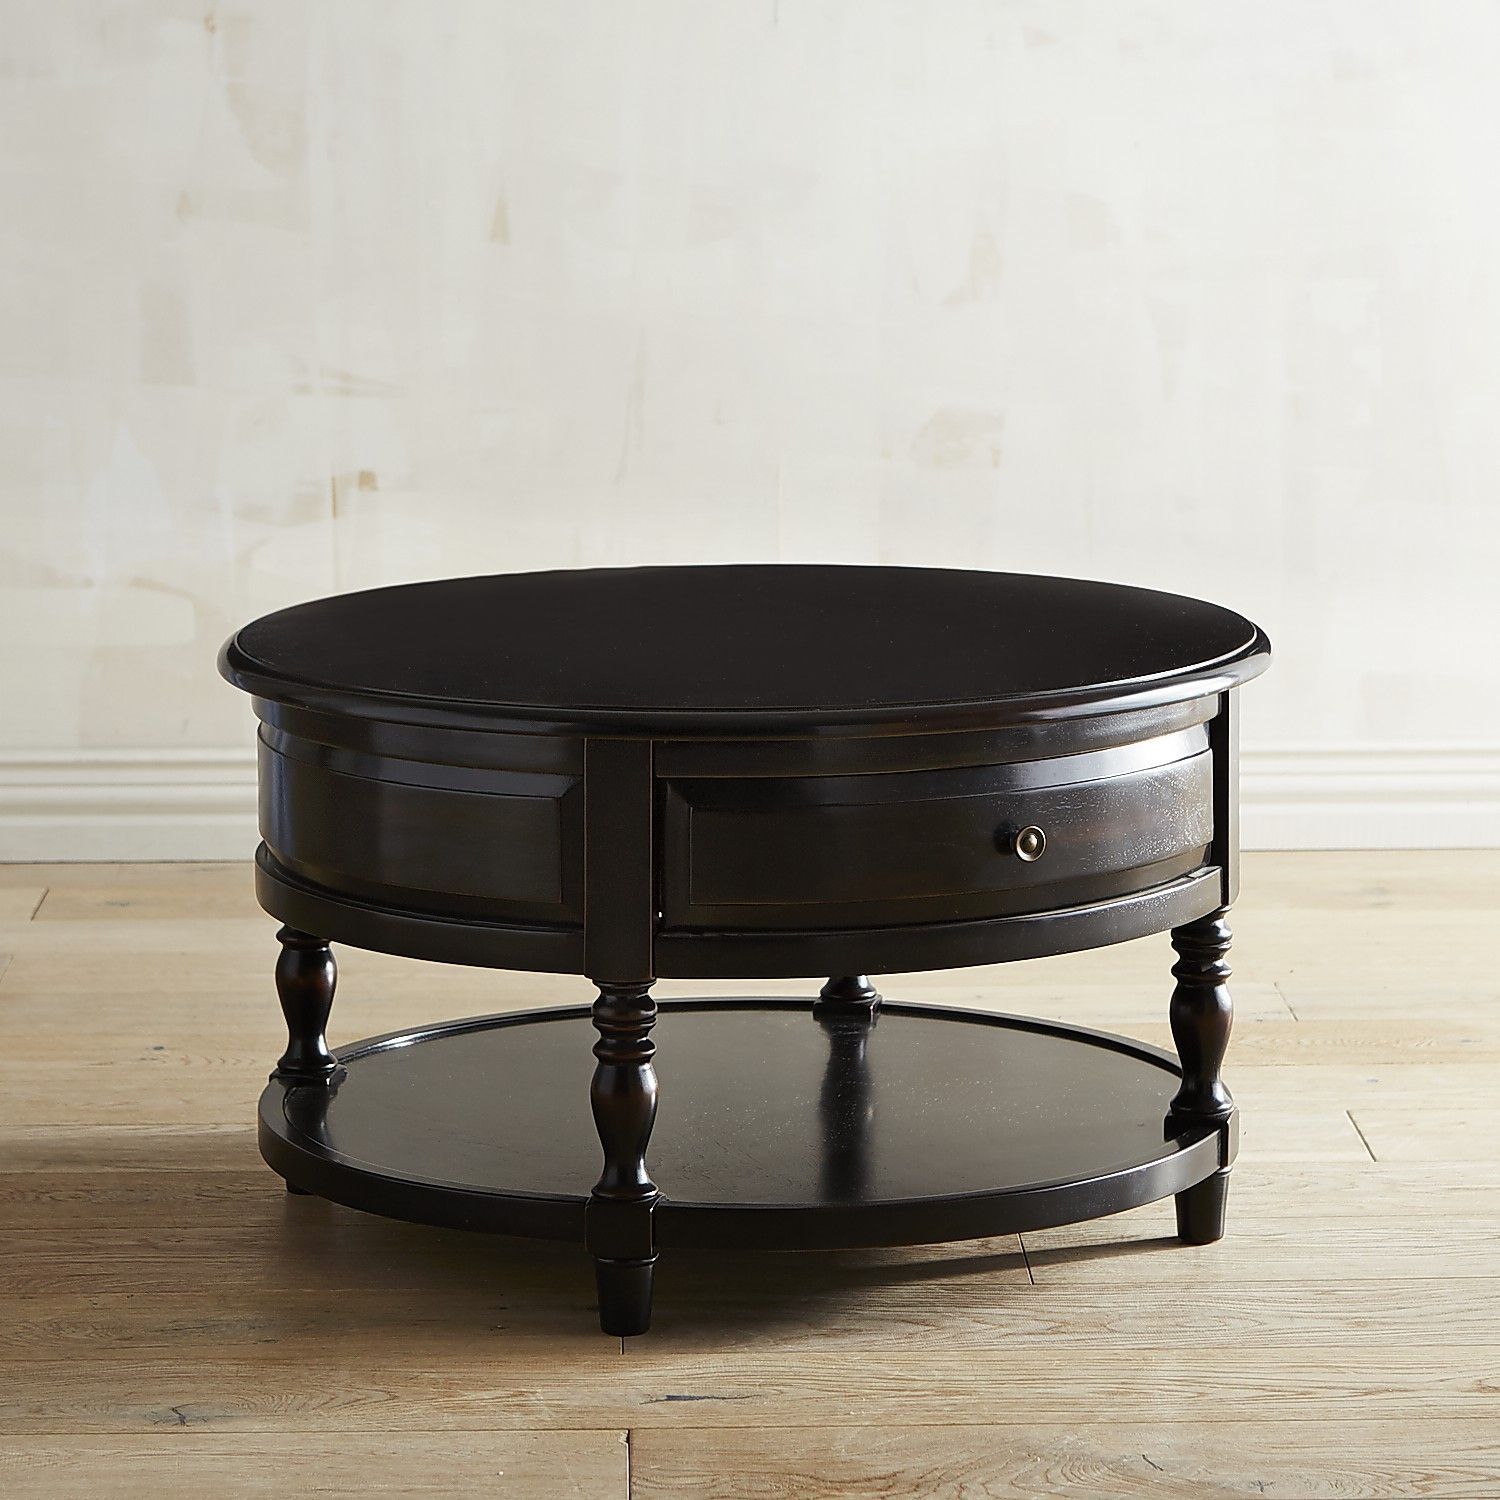 Anywhere Rubbed Black Round Coffee Table | Round Coffee Table, Round Throughout Full Black Round Coffee Tables (Gallery 20 of 20)